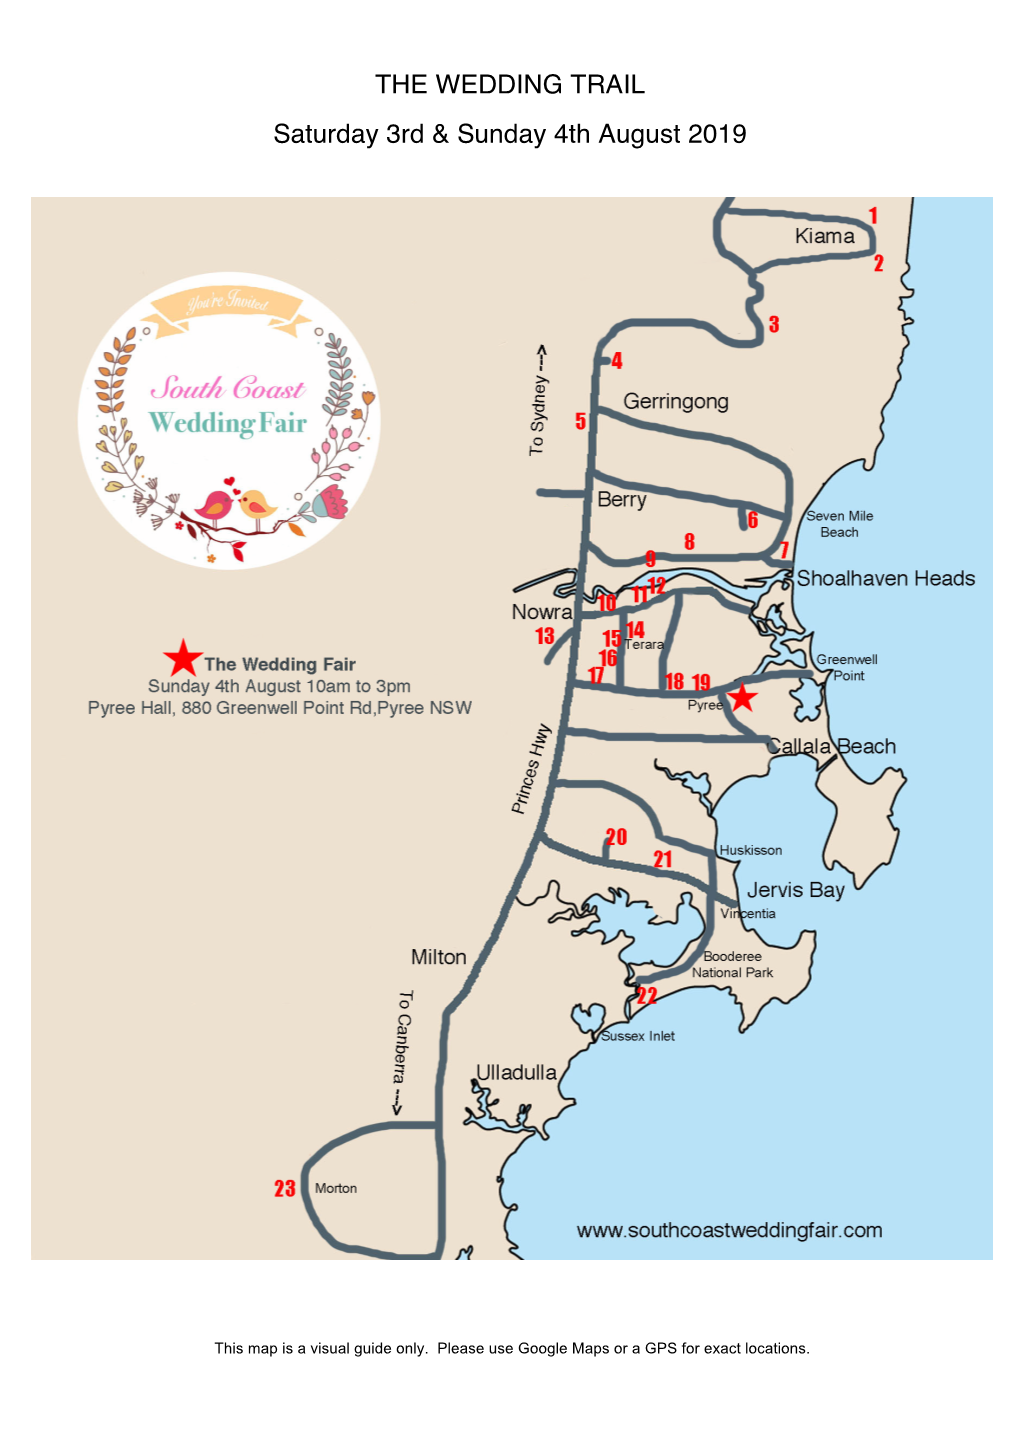 THE WEDDING TRAIL Saturday 3Rd & Sunday 4Th August 2019